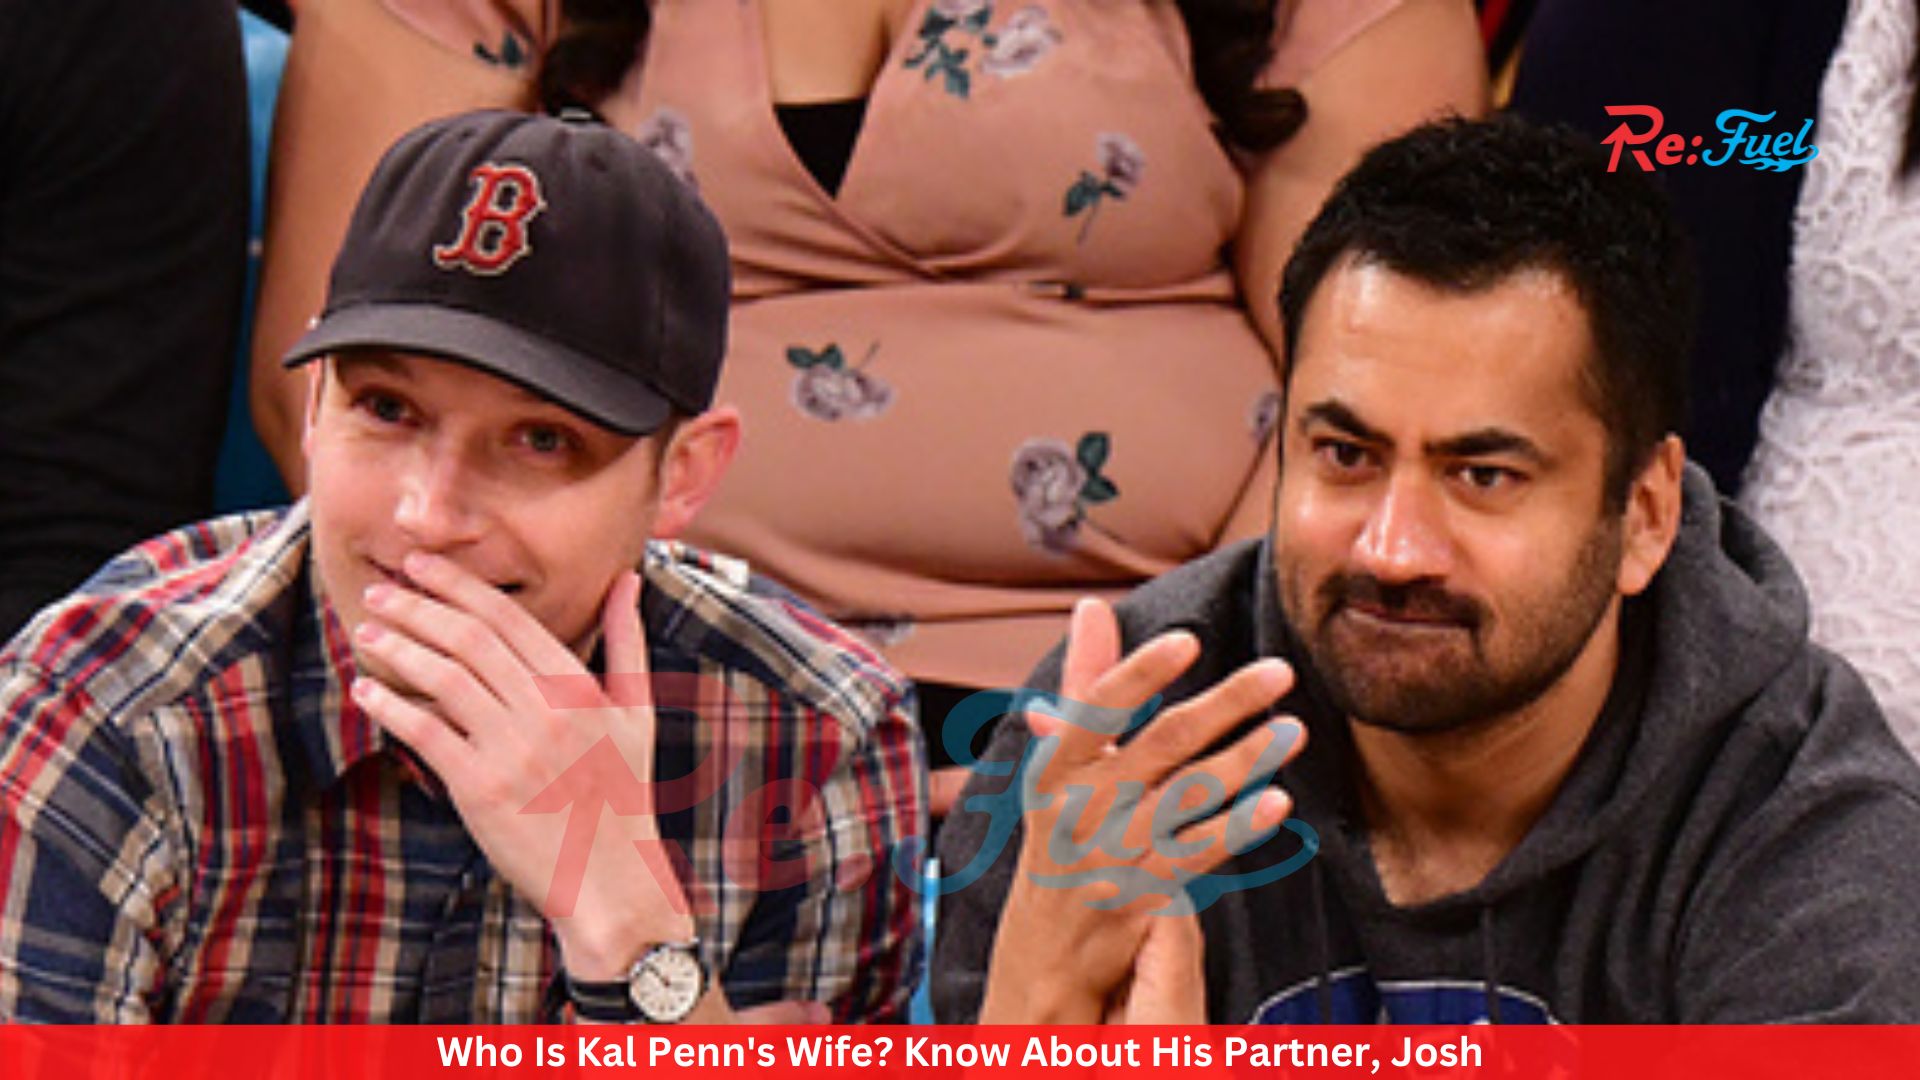 Who Is Kal Penn's Wife? Know About His Partner, Josh